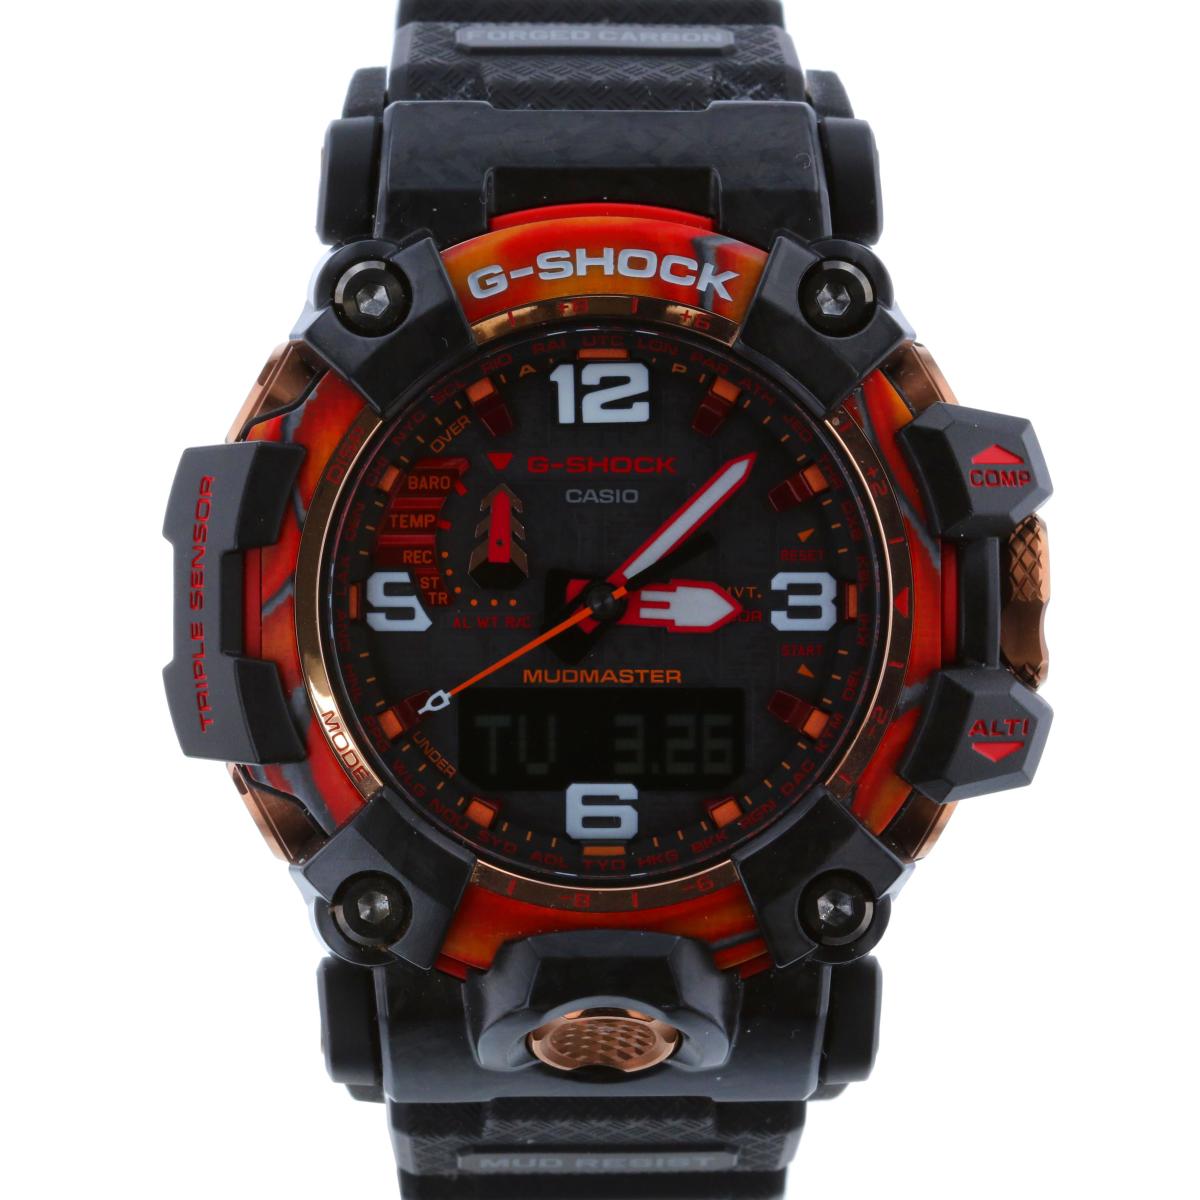 ڤͲʡۡš CASIO ʥ G-SHOCK  ե顼/ ǥ G-SHOCK Flare Red ...